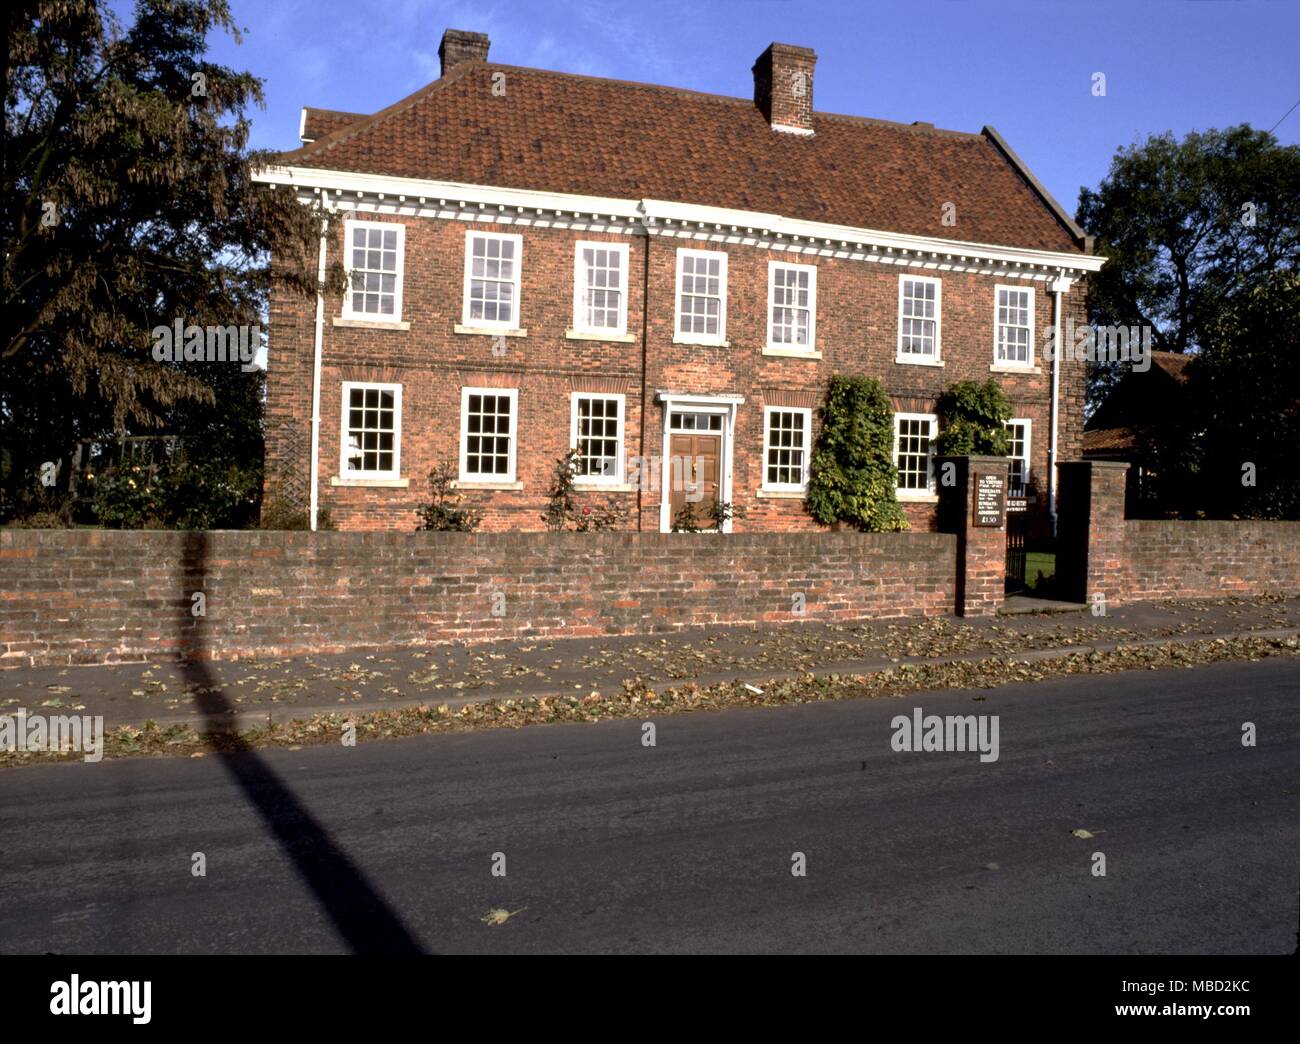 The Old Rectory at Epworth, was one haunted by poltergeists starting around 1715. The noises were heard in Old Jeffrey's room at first and centred on the kitchen. Stock Photo